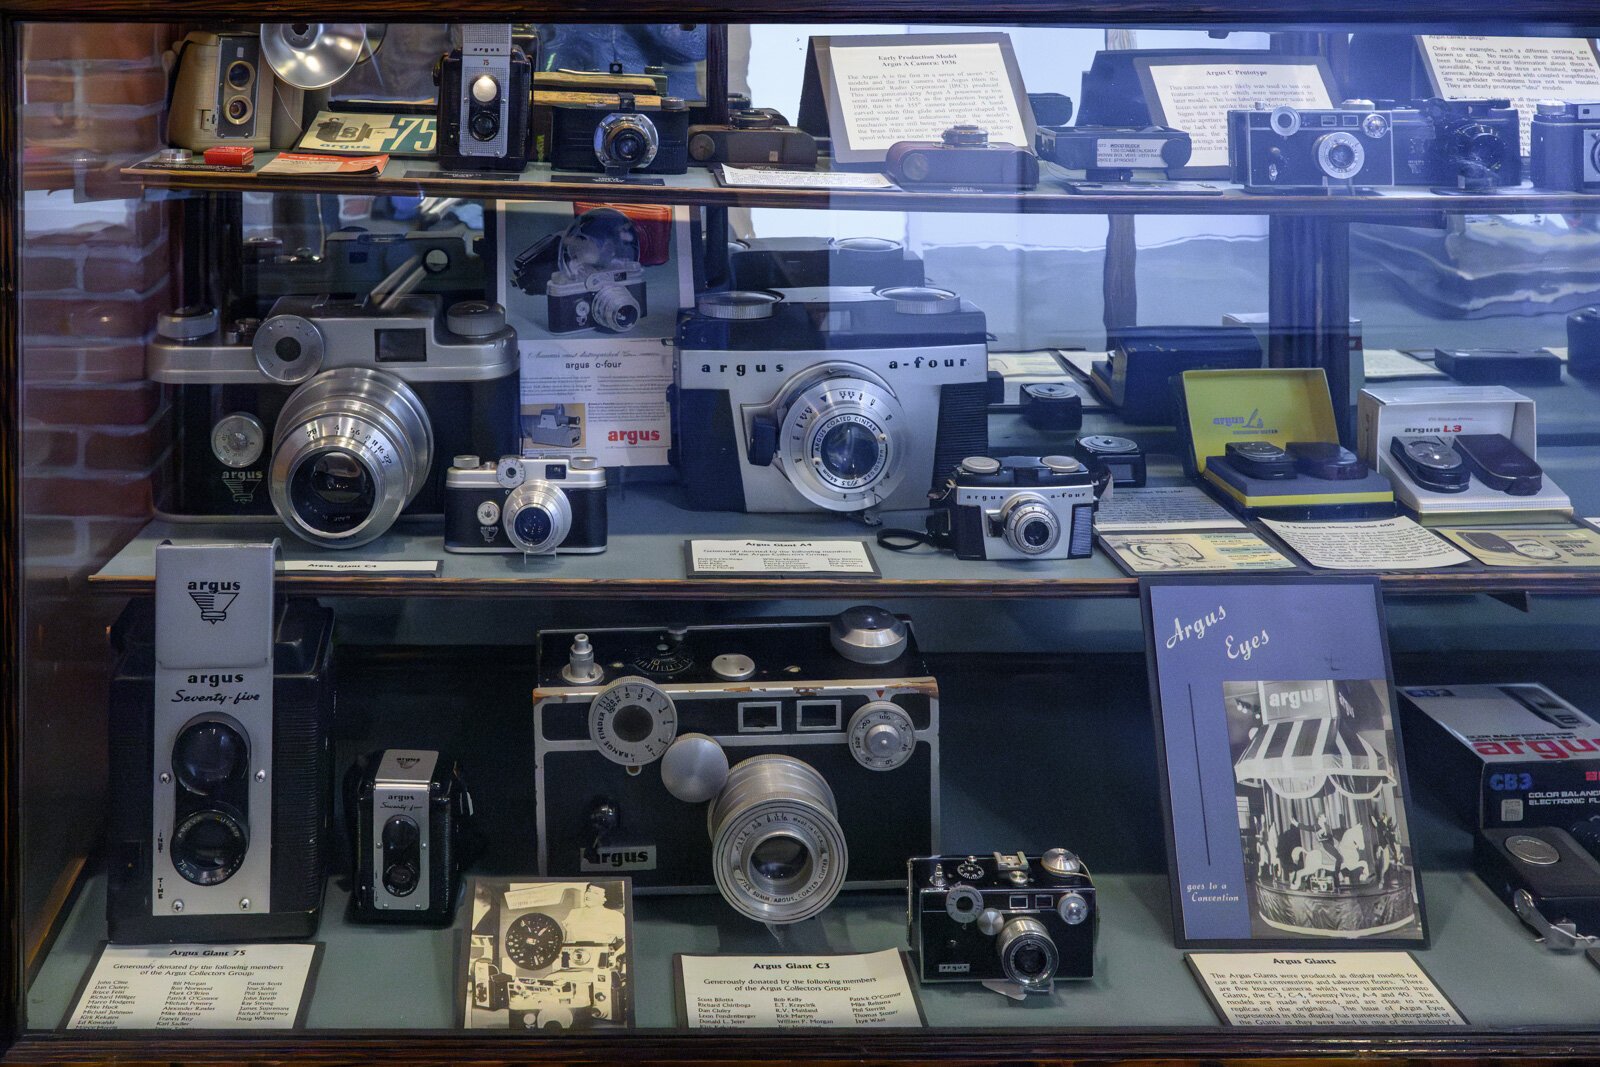 Argus cameras and large display models at the Argus Museum.